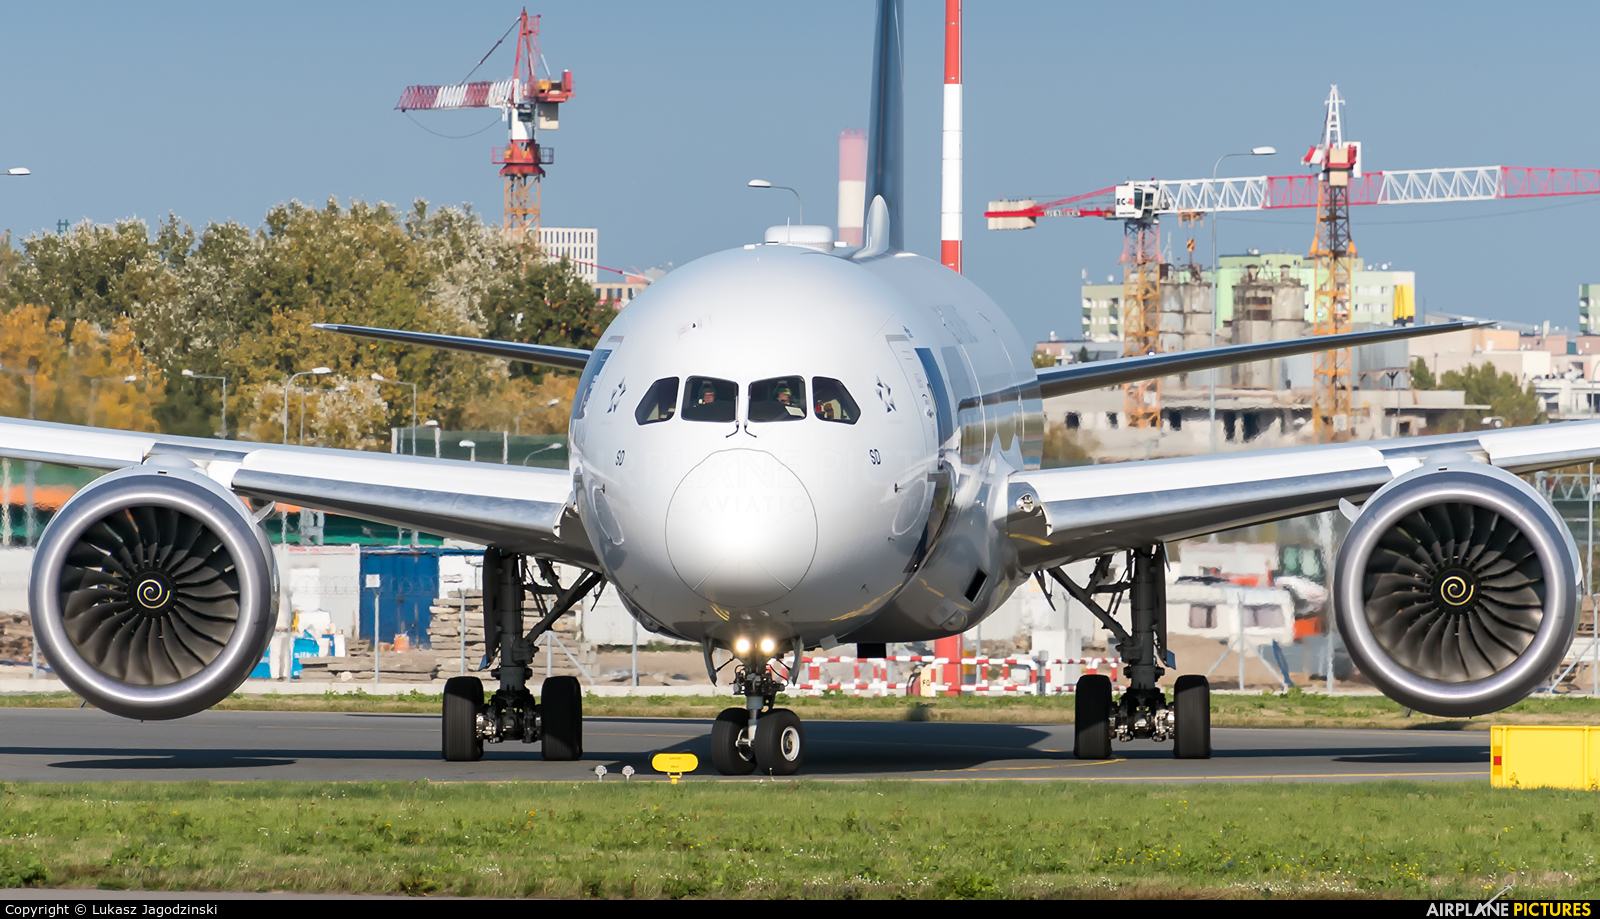 LOT - Polish Airlines SP-LSD aircraft at Warsaw - Frederic Chopin